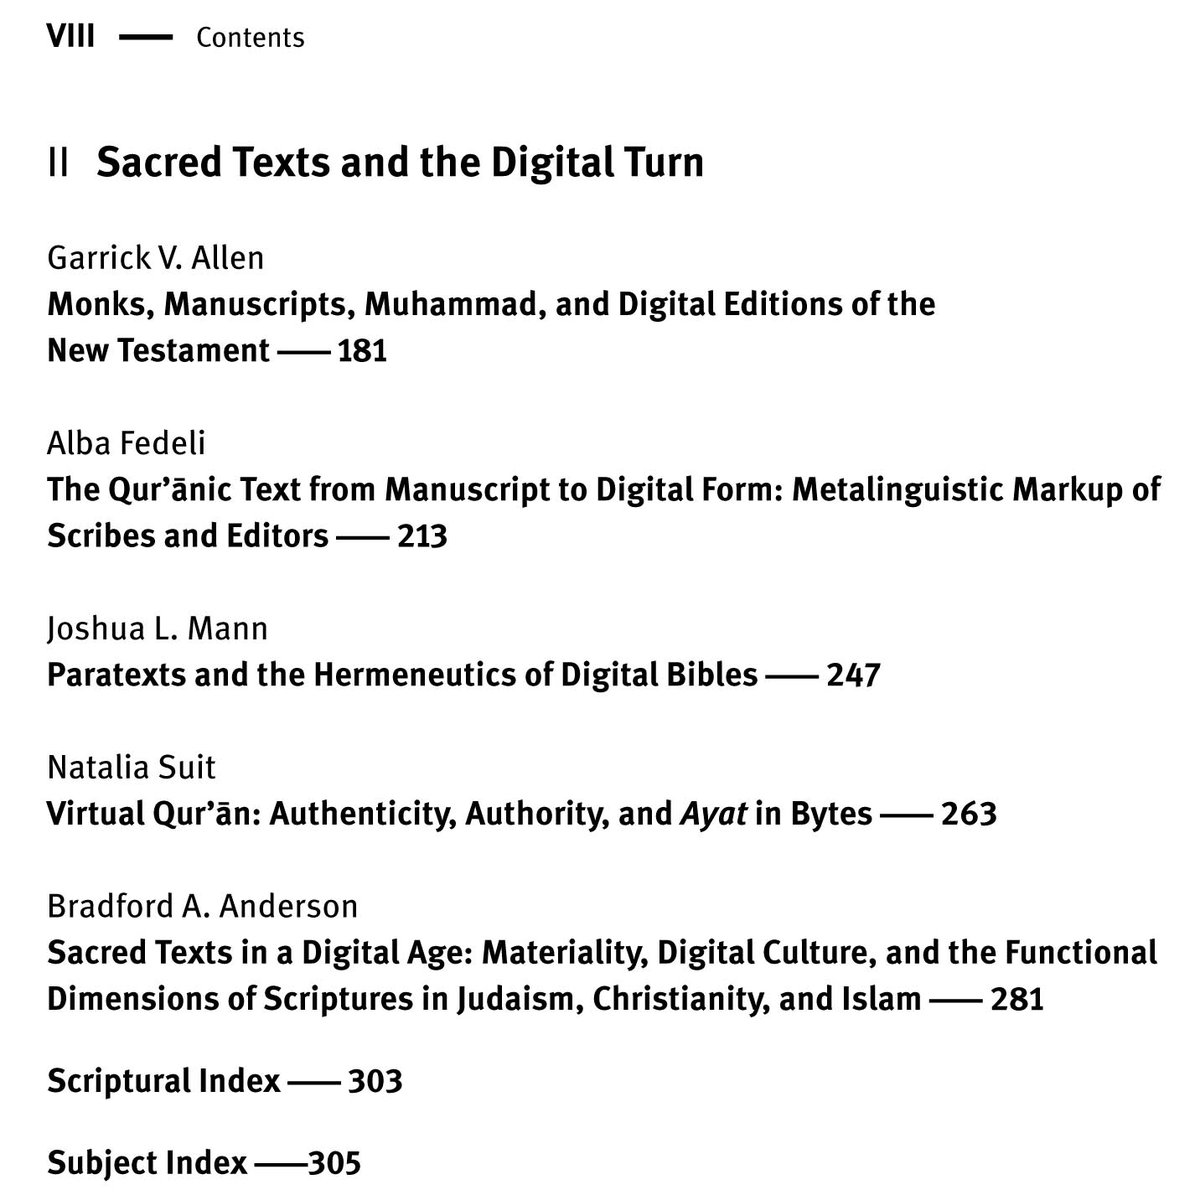 #OpenAccess #SacredTexts #Judaism #Christianity #Islam #Papyrus #Qurān #IsalmicManuscripts #Codicology #Psalms #Scribes #Bibles From Scrolls to Scrolling Sacred Texts, Materiality, and Dynamic Media Cultures ed. Bradford A. Anderson De Gruyter 2020 PDF🎯 library.oapen.org/viewer/web/vie…